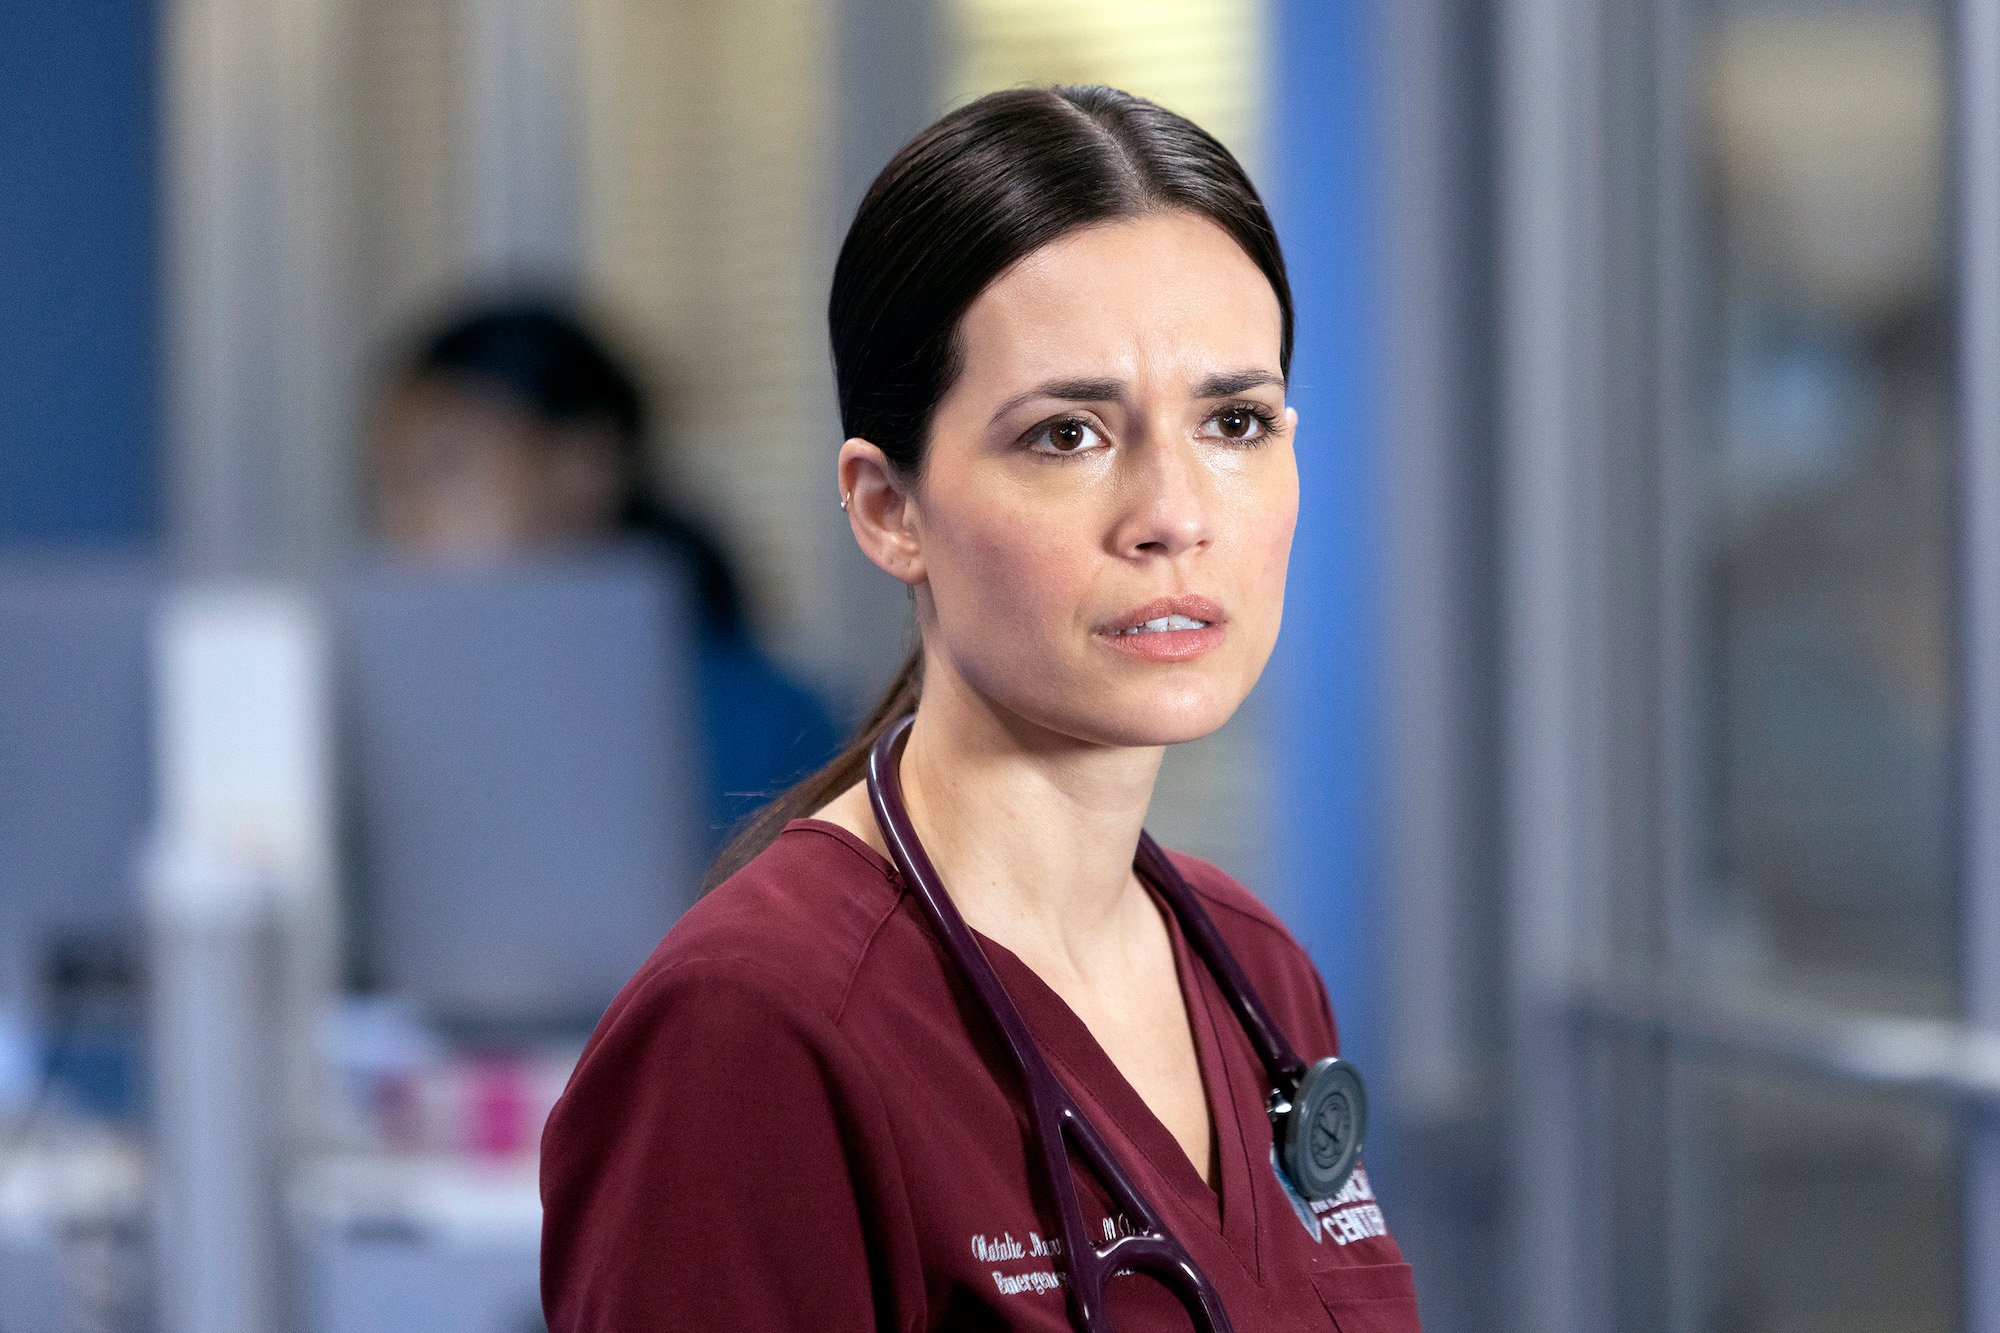 Chicago Med' Cast: Why Did Torrey DeVitto Leave the Show?